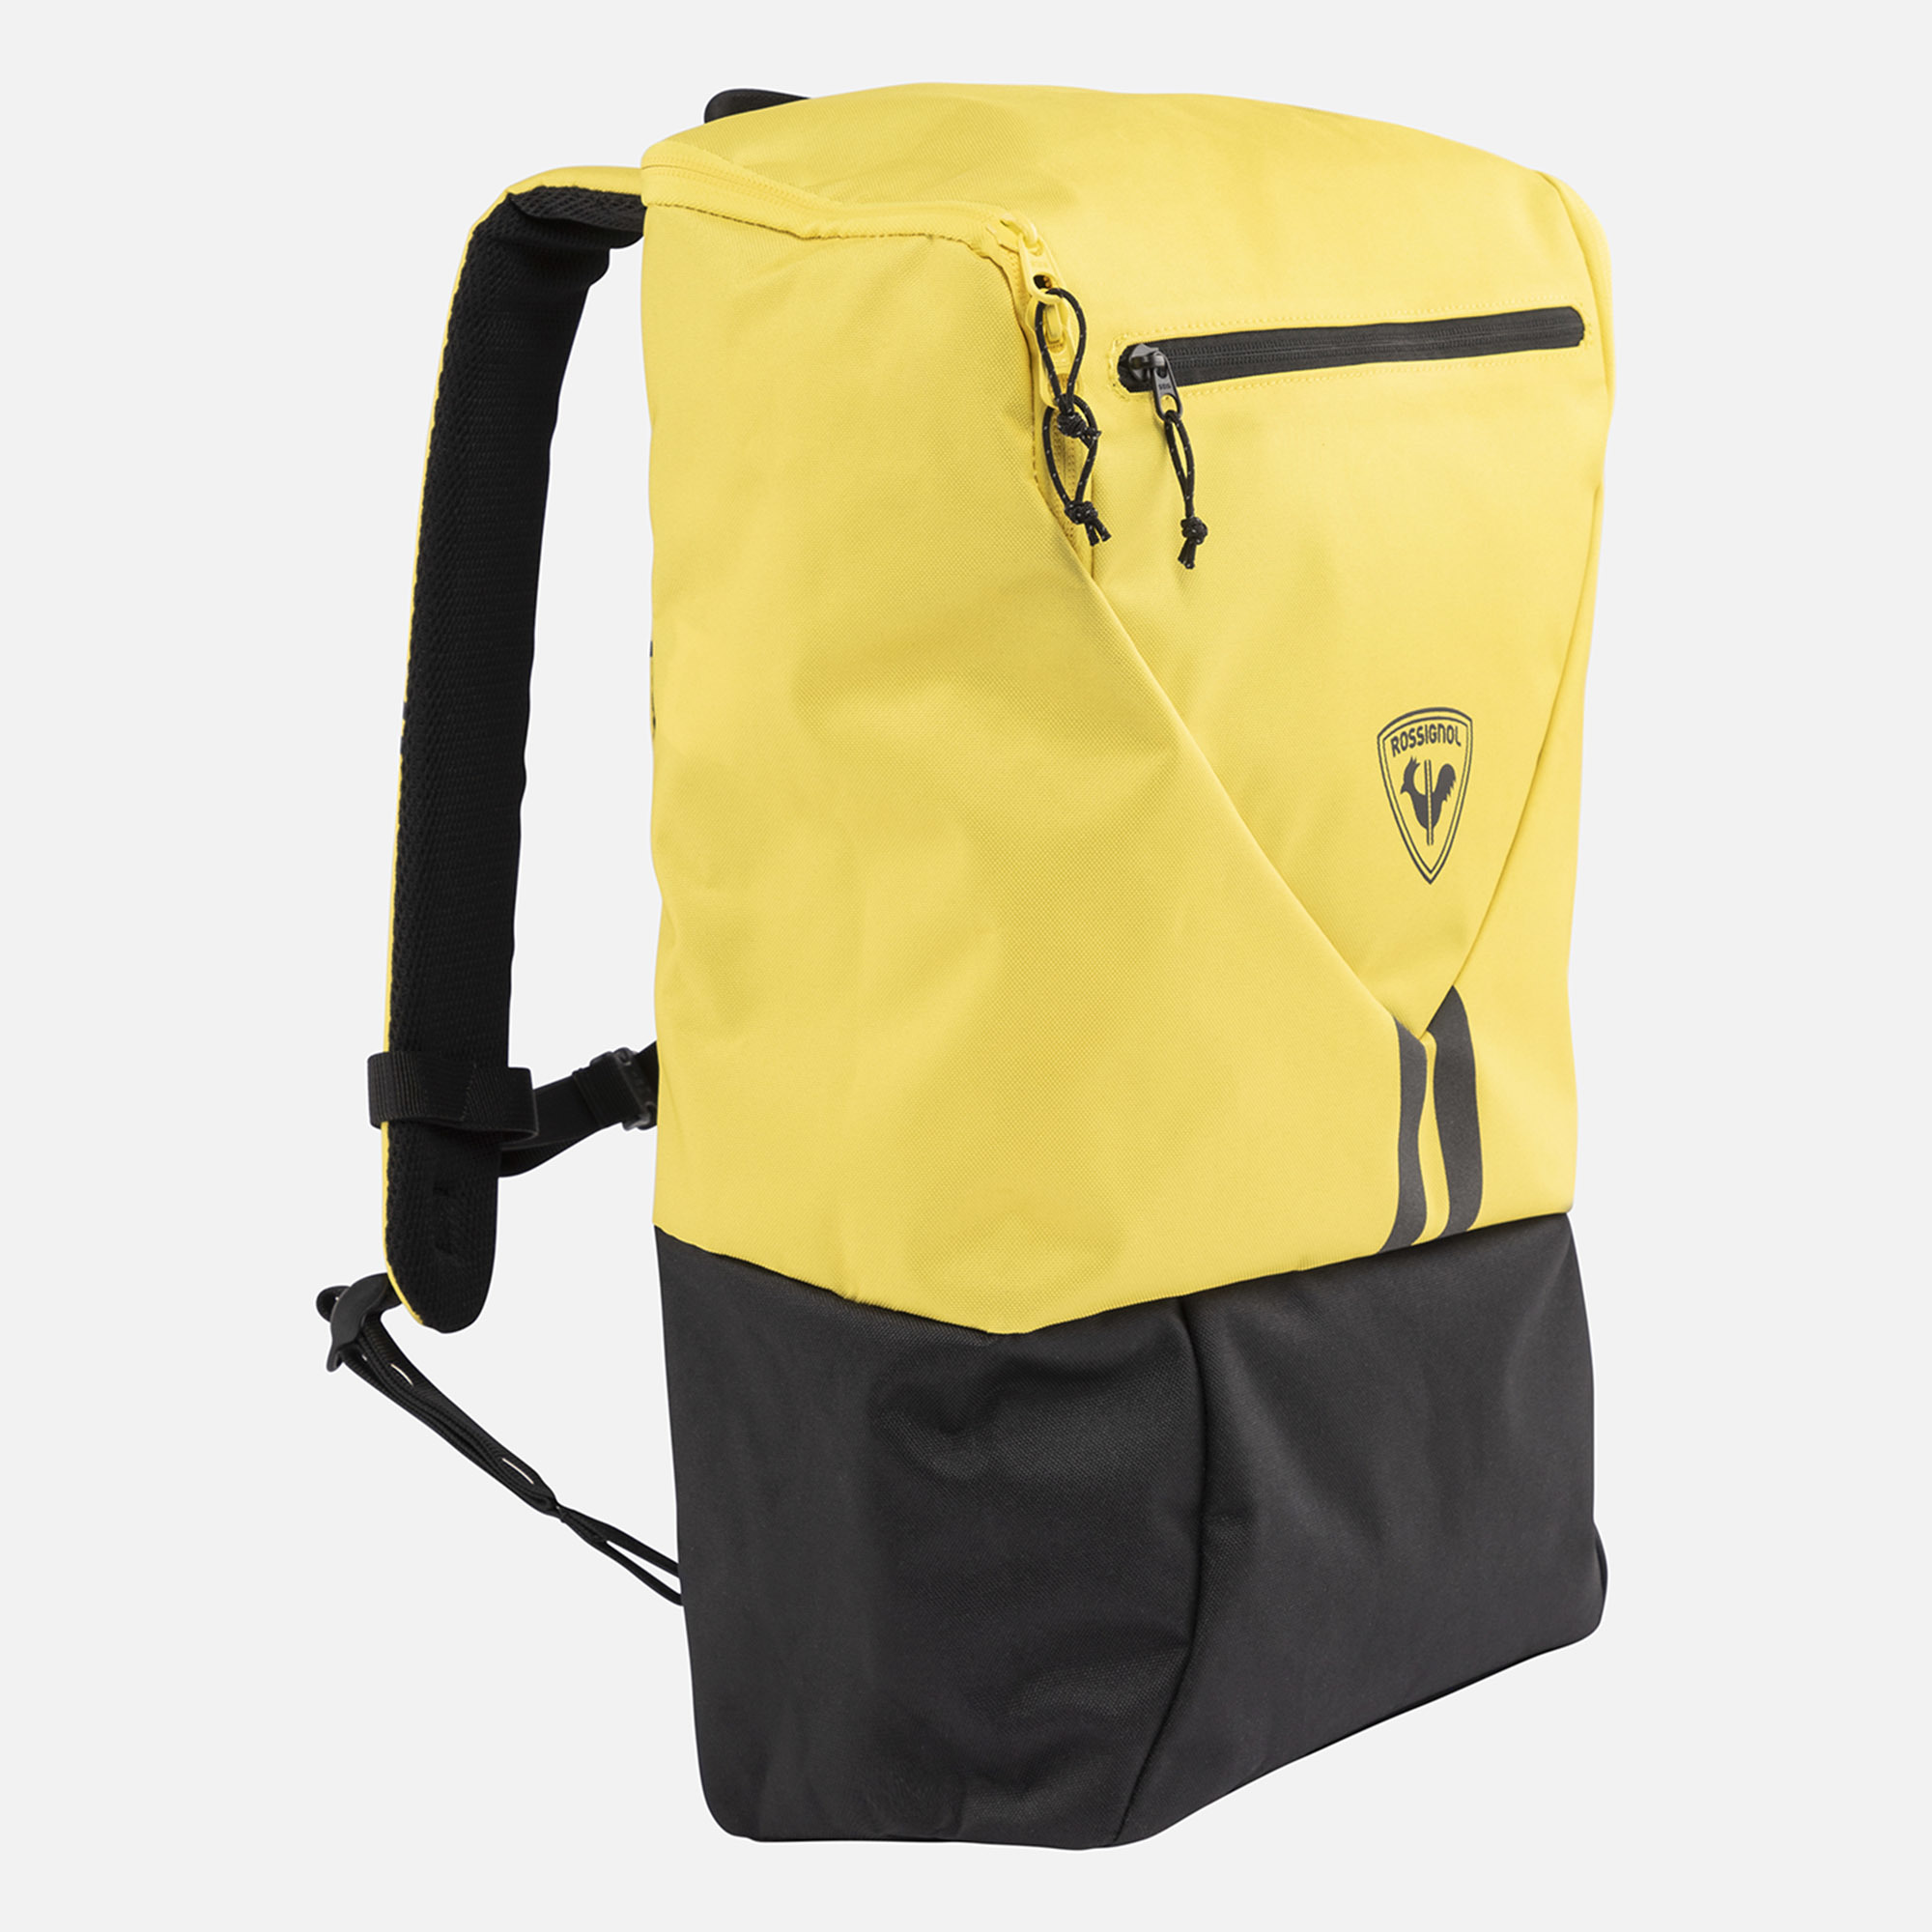 Unisex 20L yellow Commuter backpack